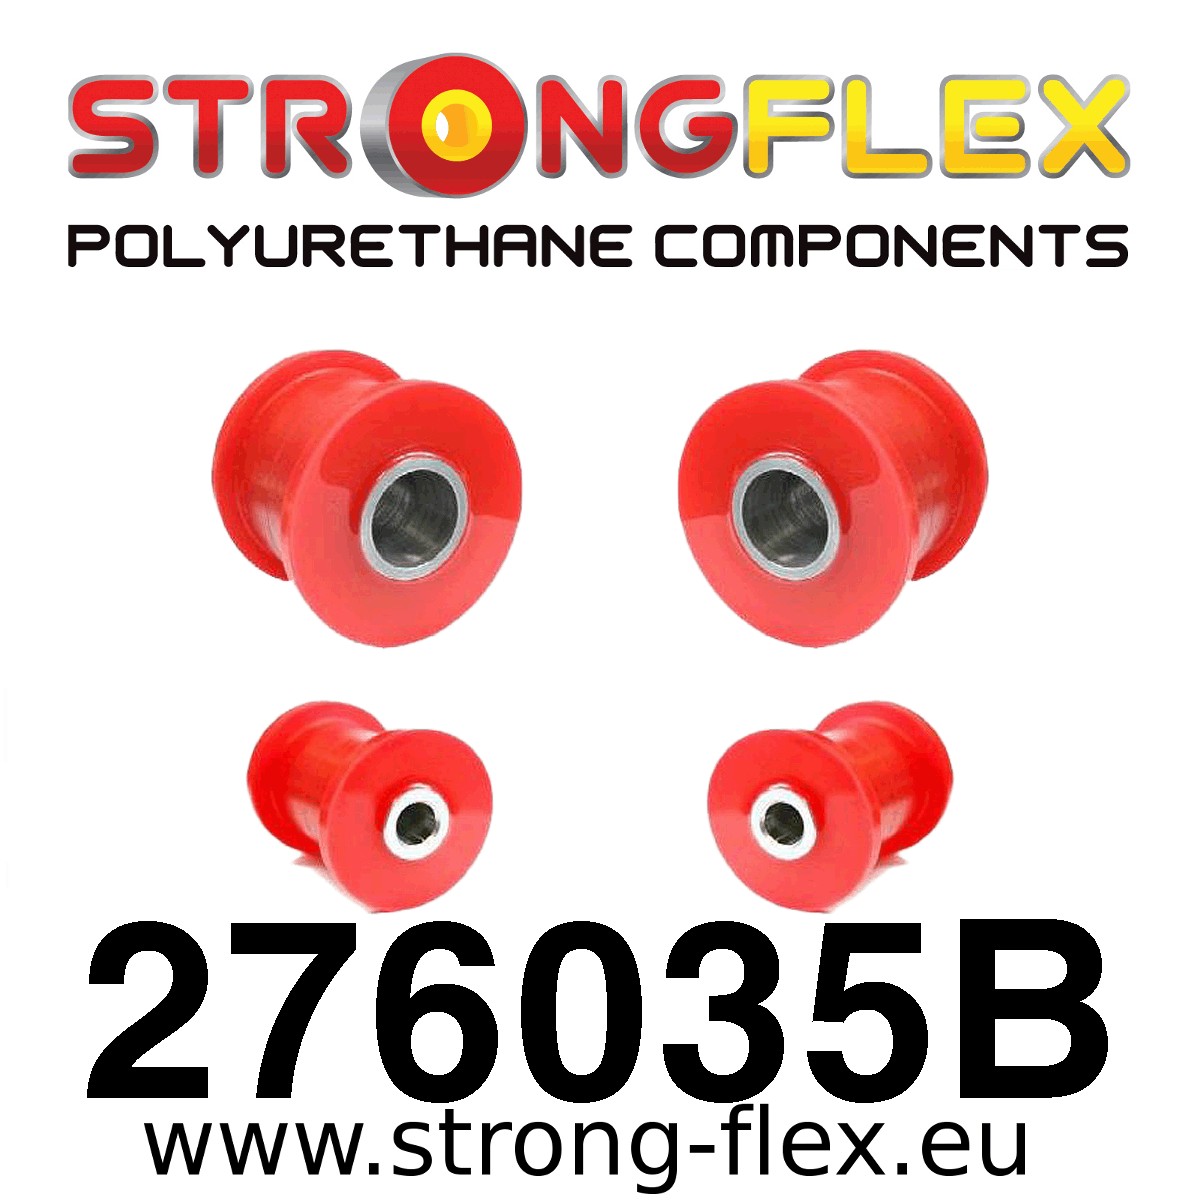 images/productimages/small/Strongflex-1964.jpg